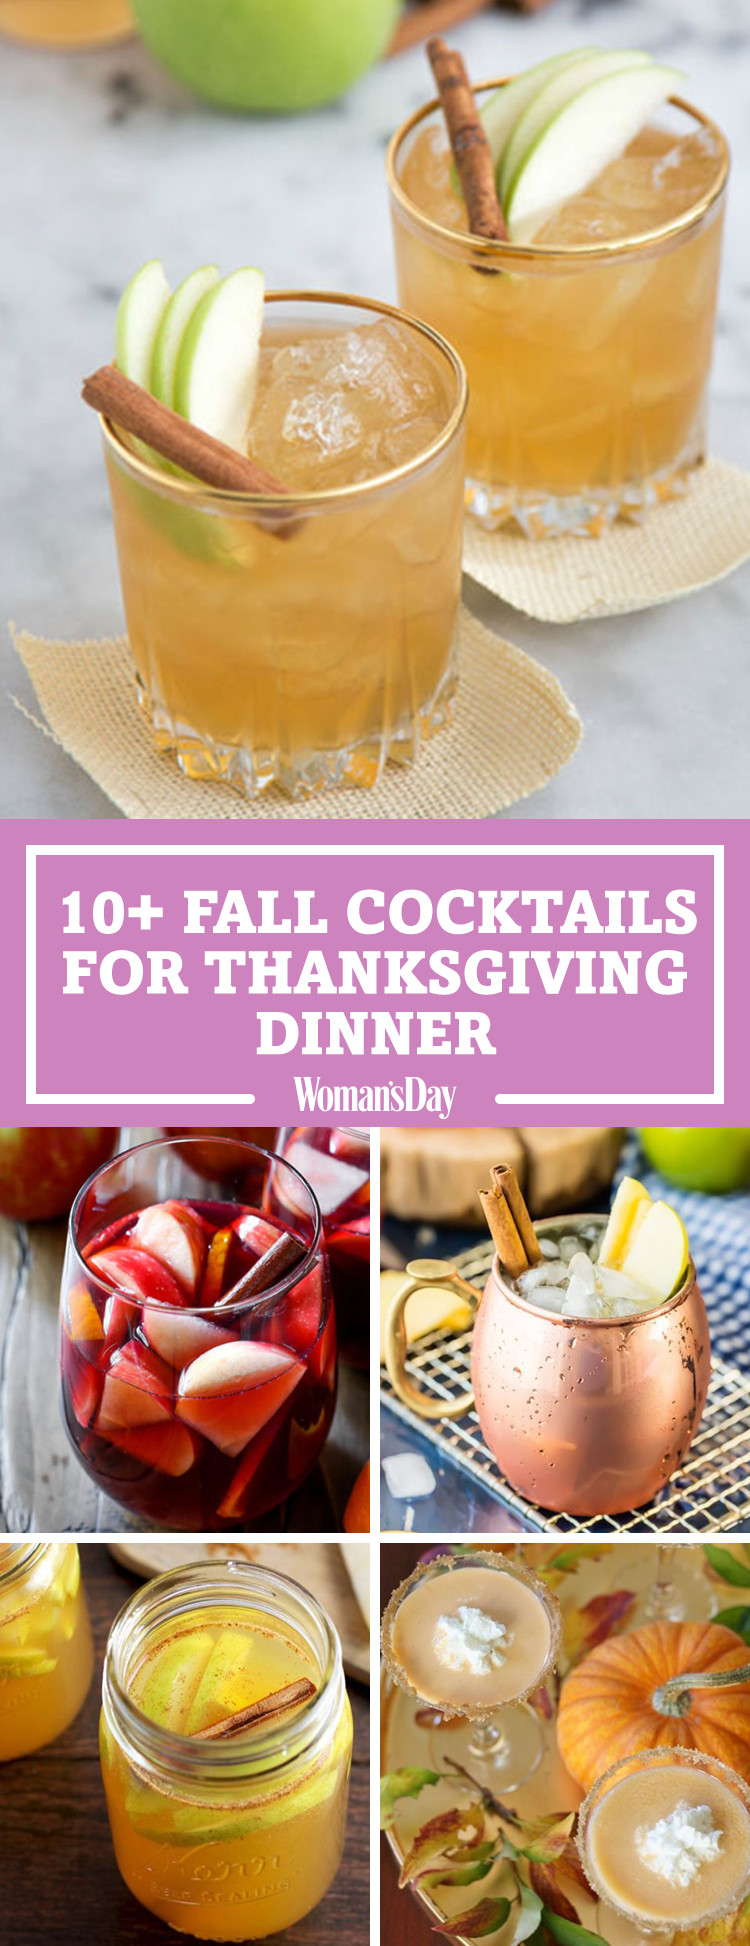 Thanksgiving Drinks Alcoholic
 14 Best Fall Cocktails for Thanksgiving Recipes for Easy